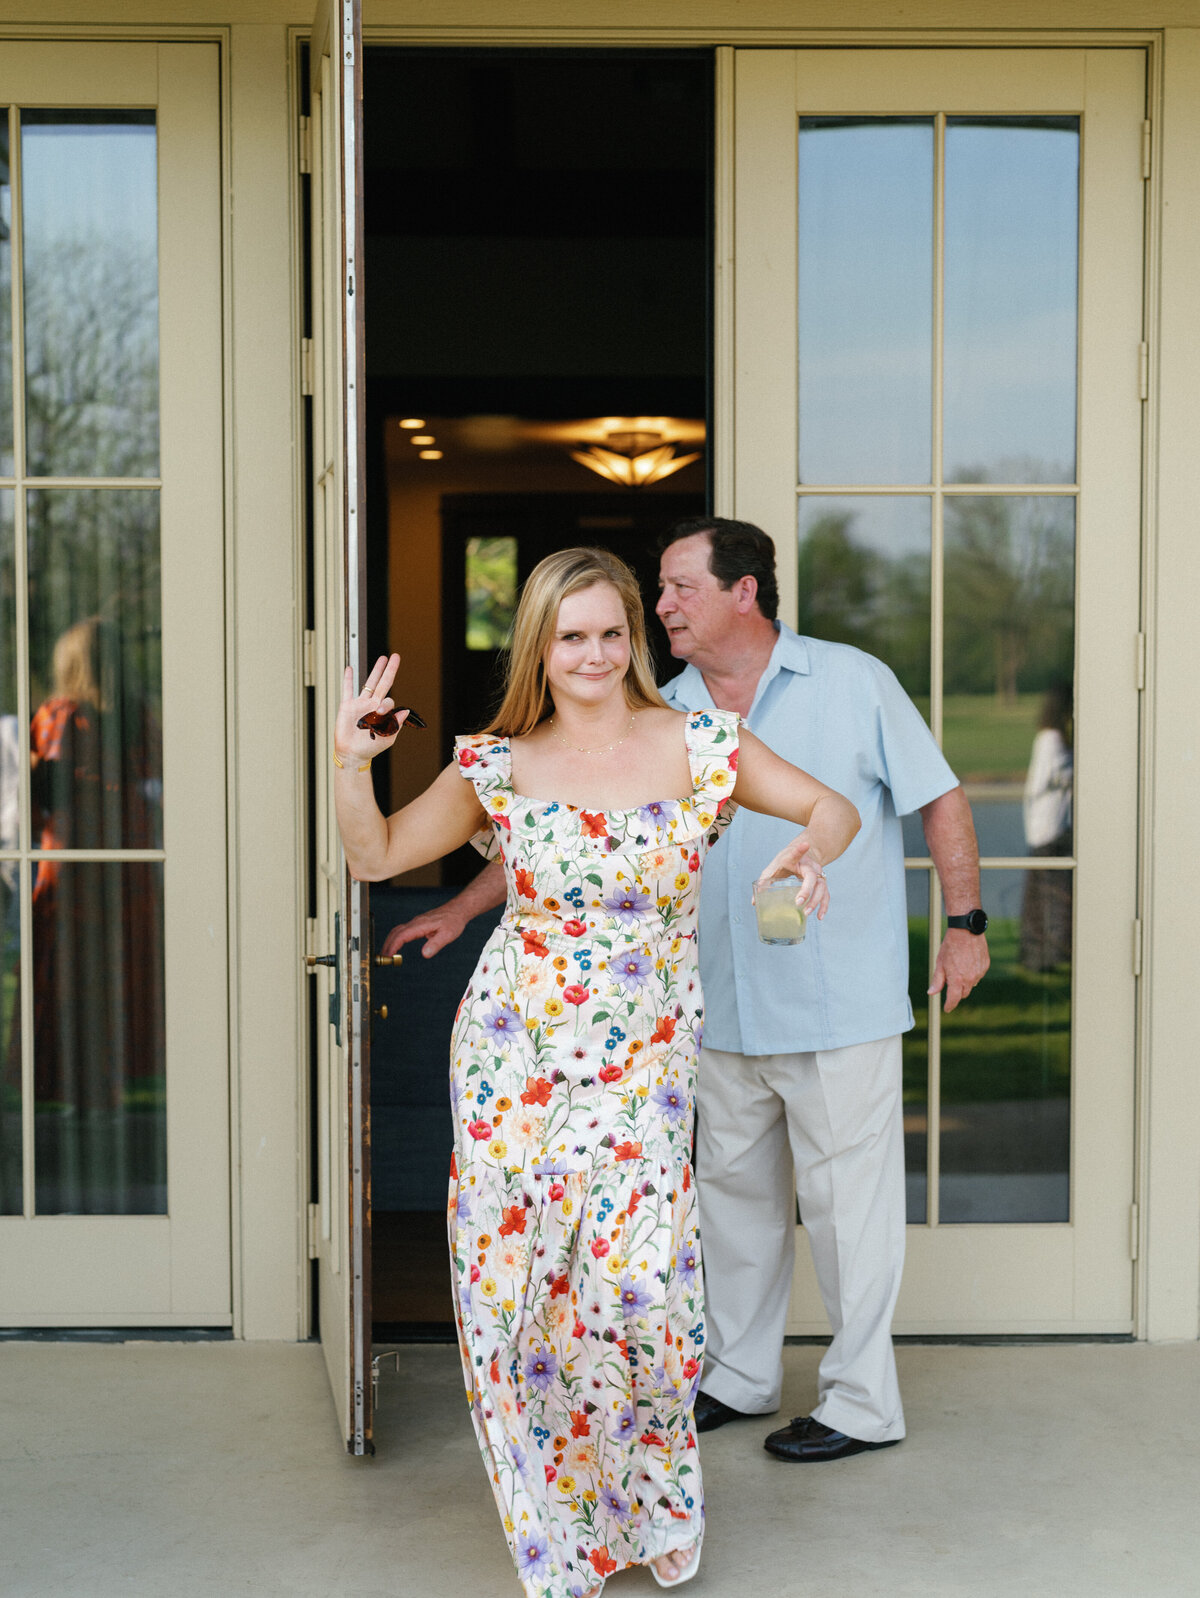 Rehearsal dinner photography at unique Austin venues